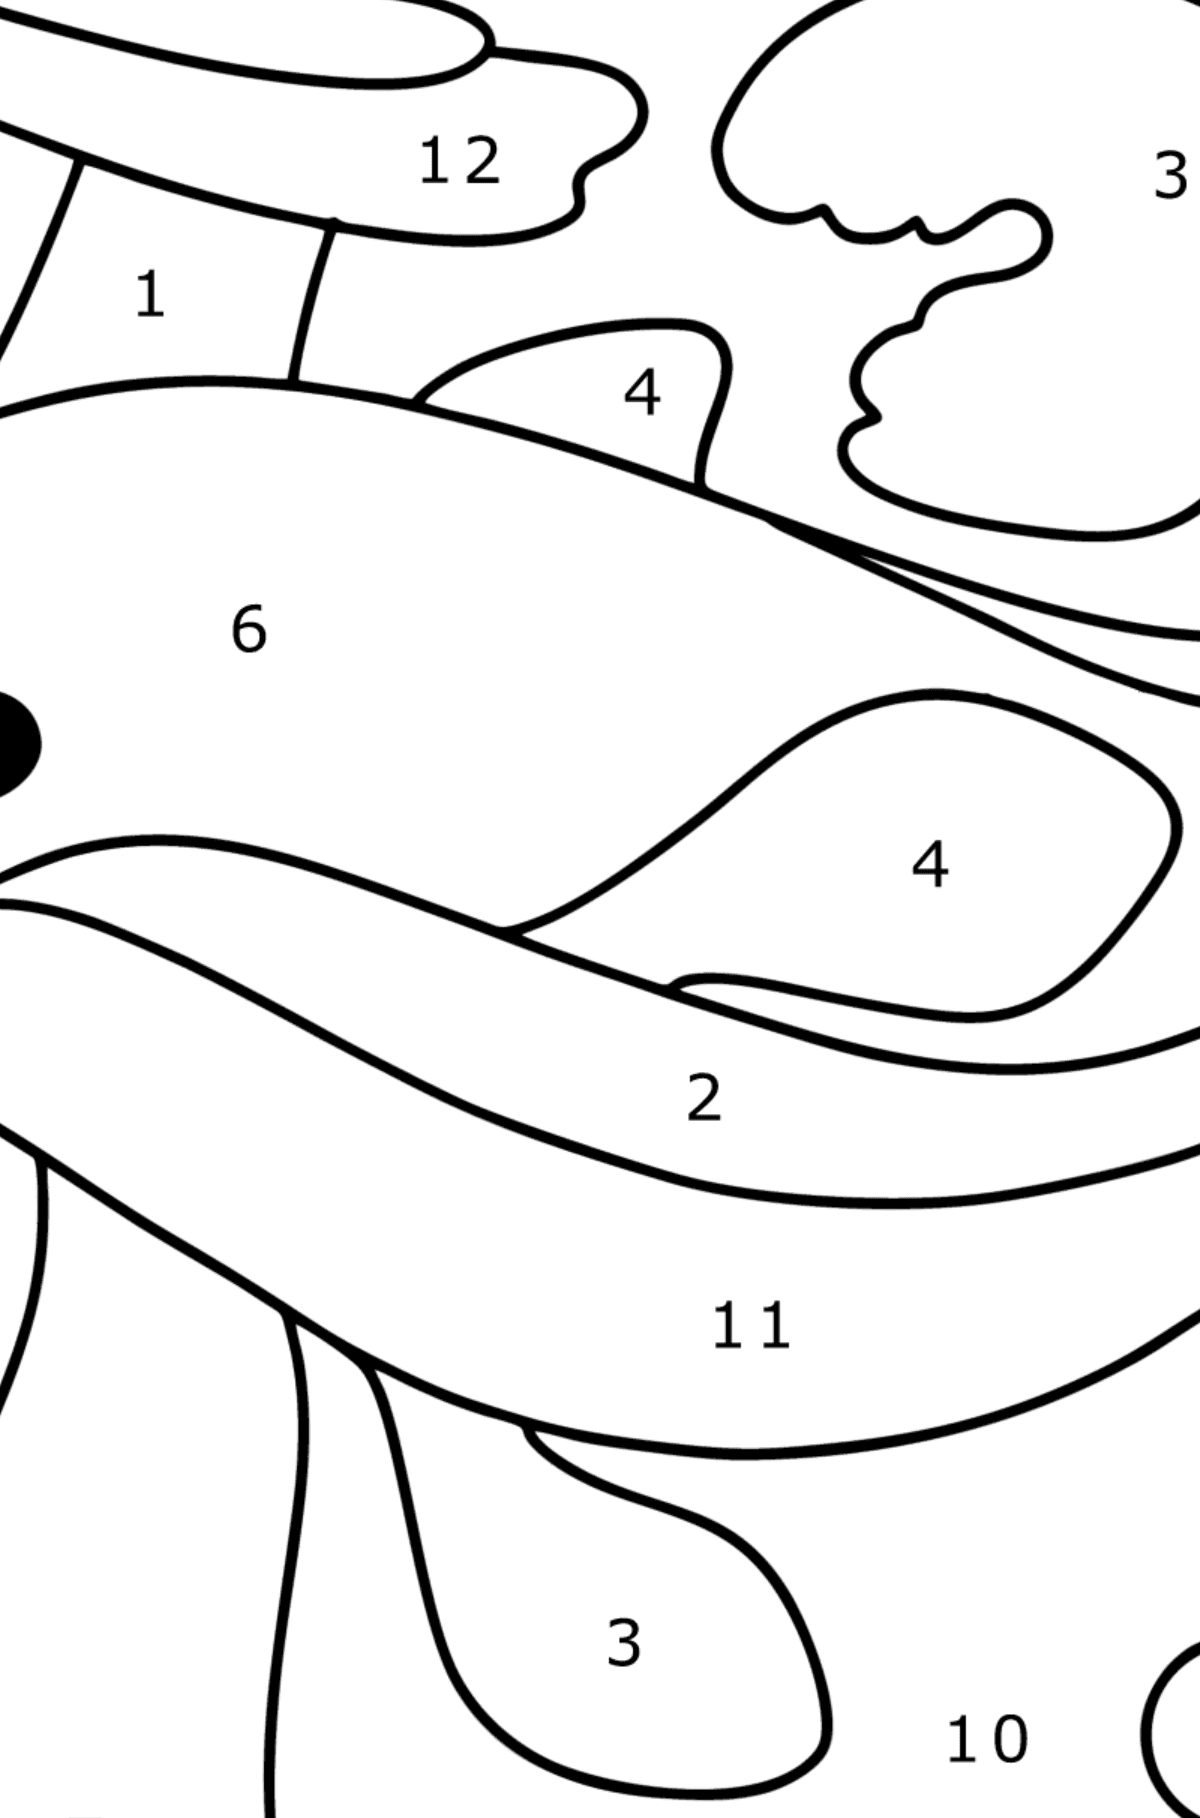 Dolphin in Water coloring page - Coloring by Numbers for Kids